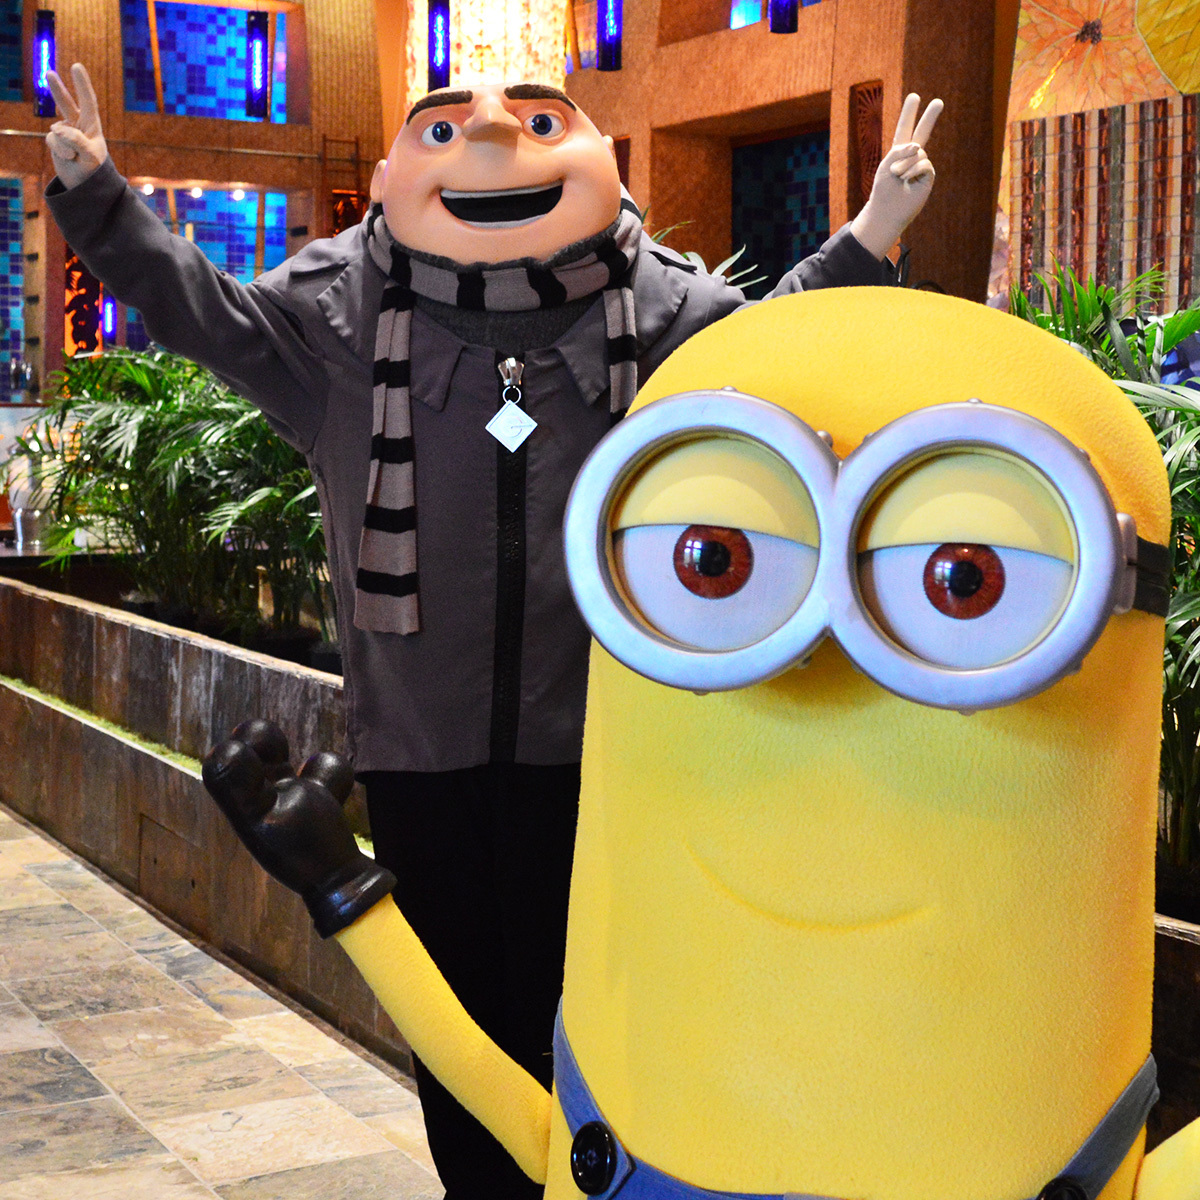 Gru and a Minion Welcoming Guests at Despicable Me Character Breakfast